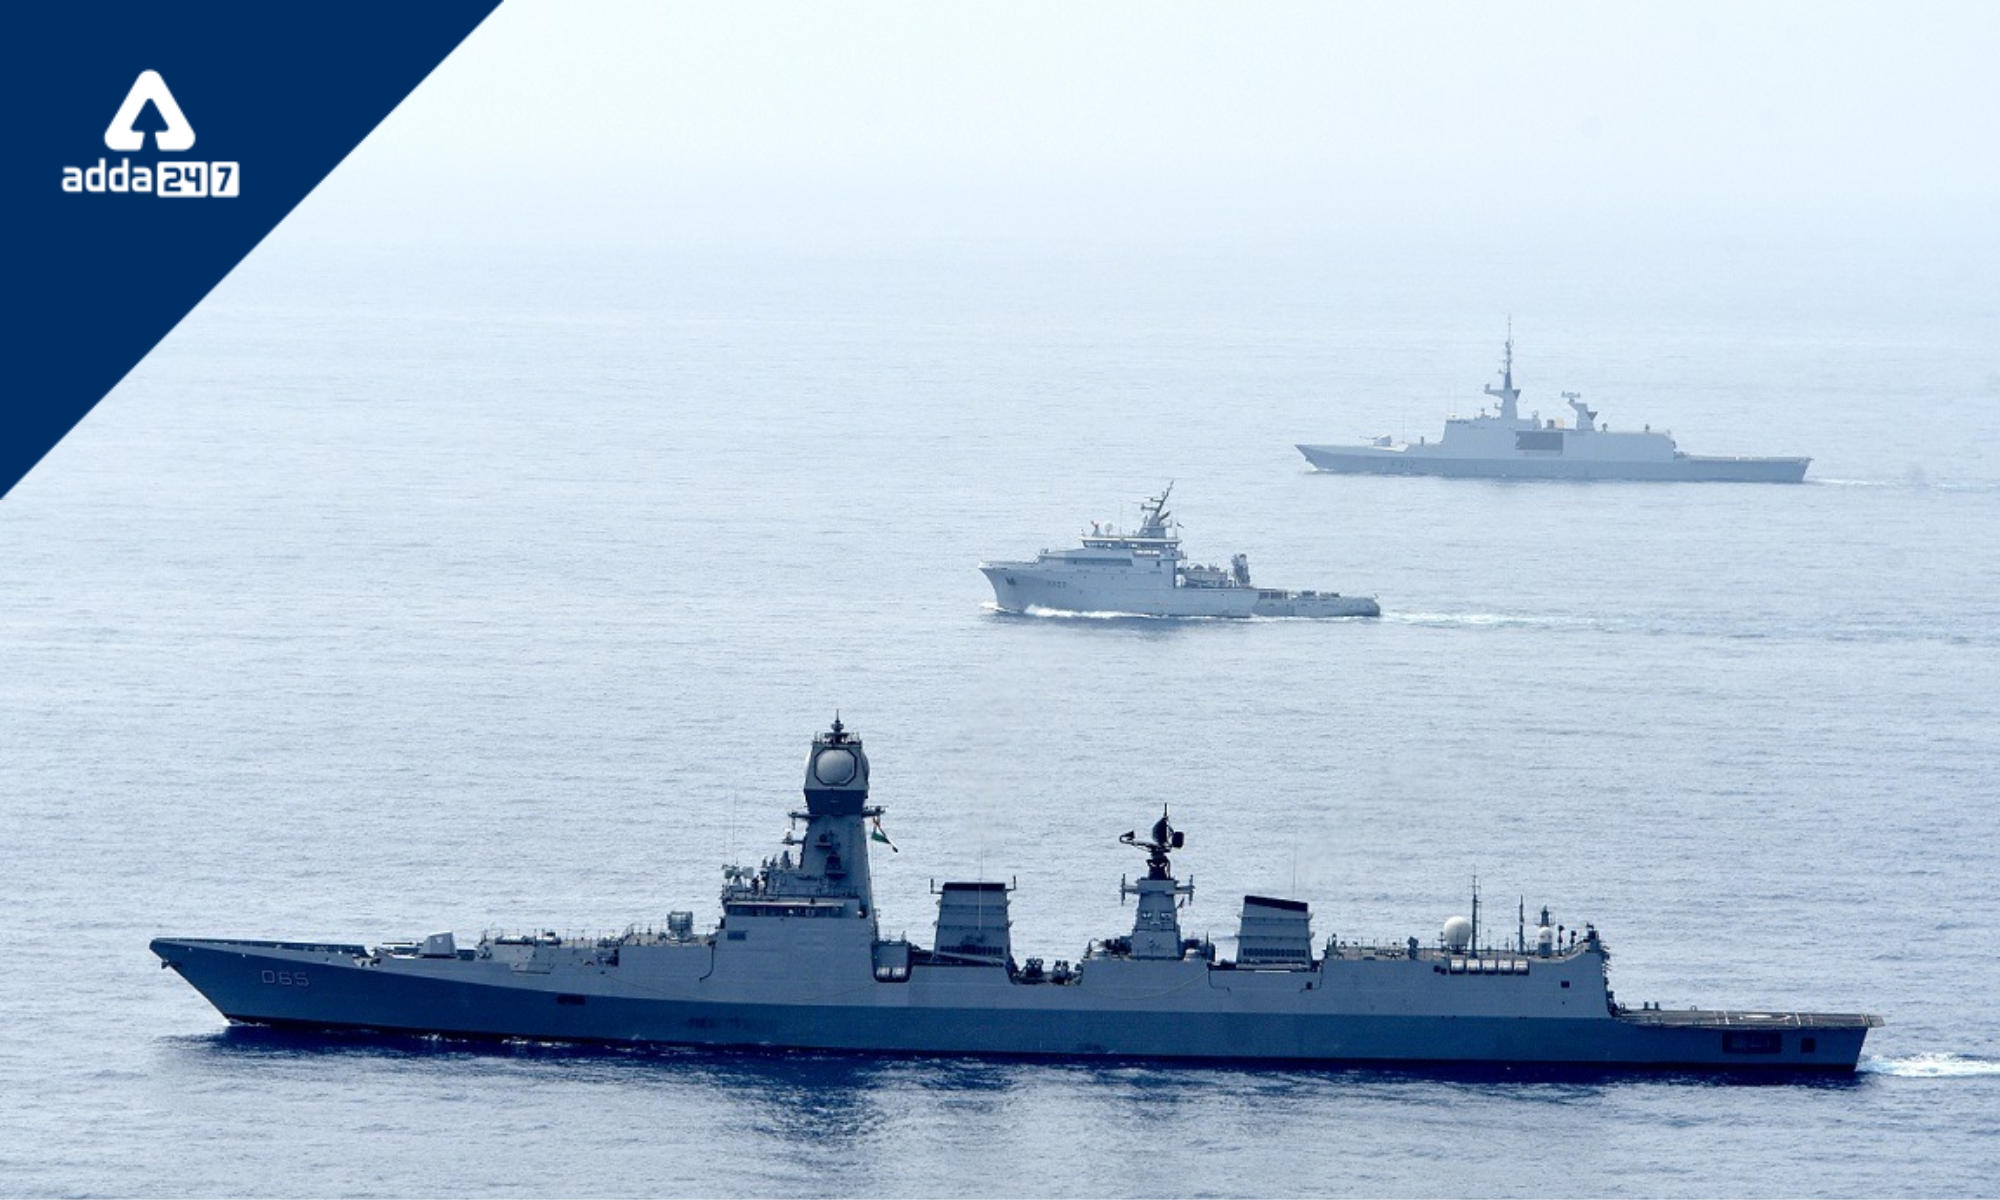 UAE, France, and India conduct discussions for maritime security_40.1